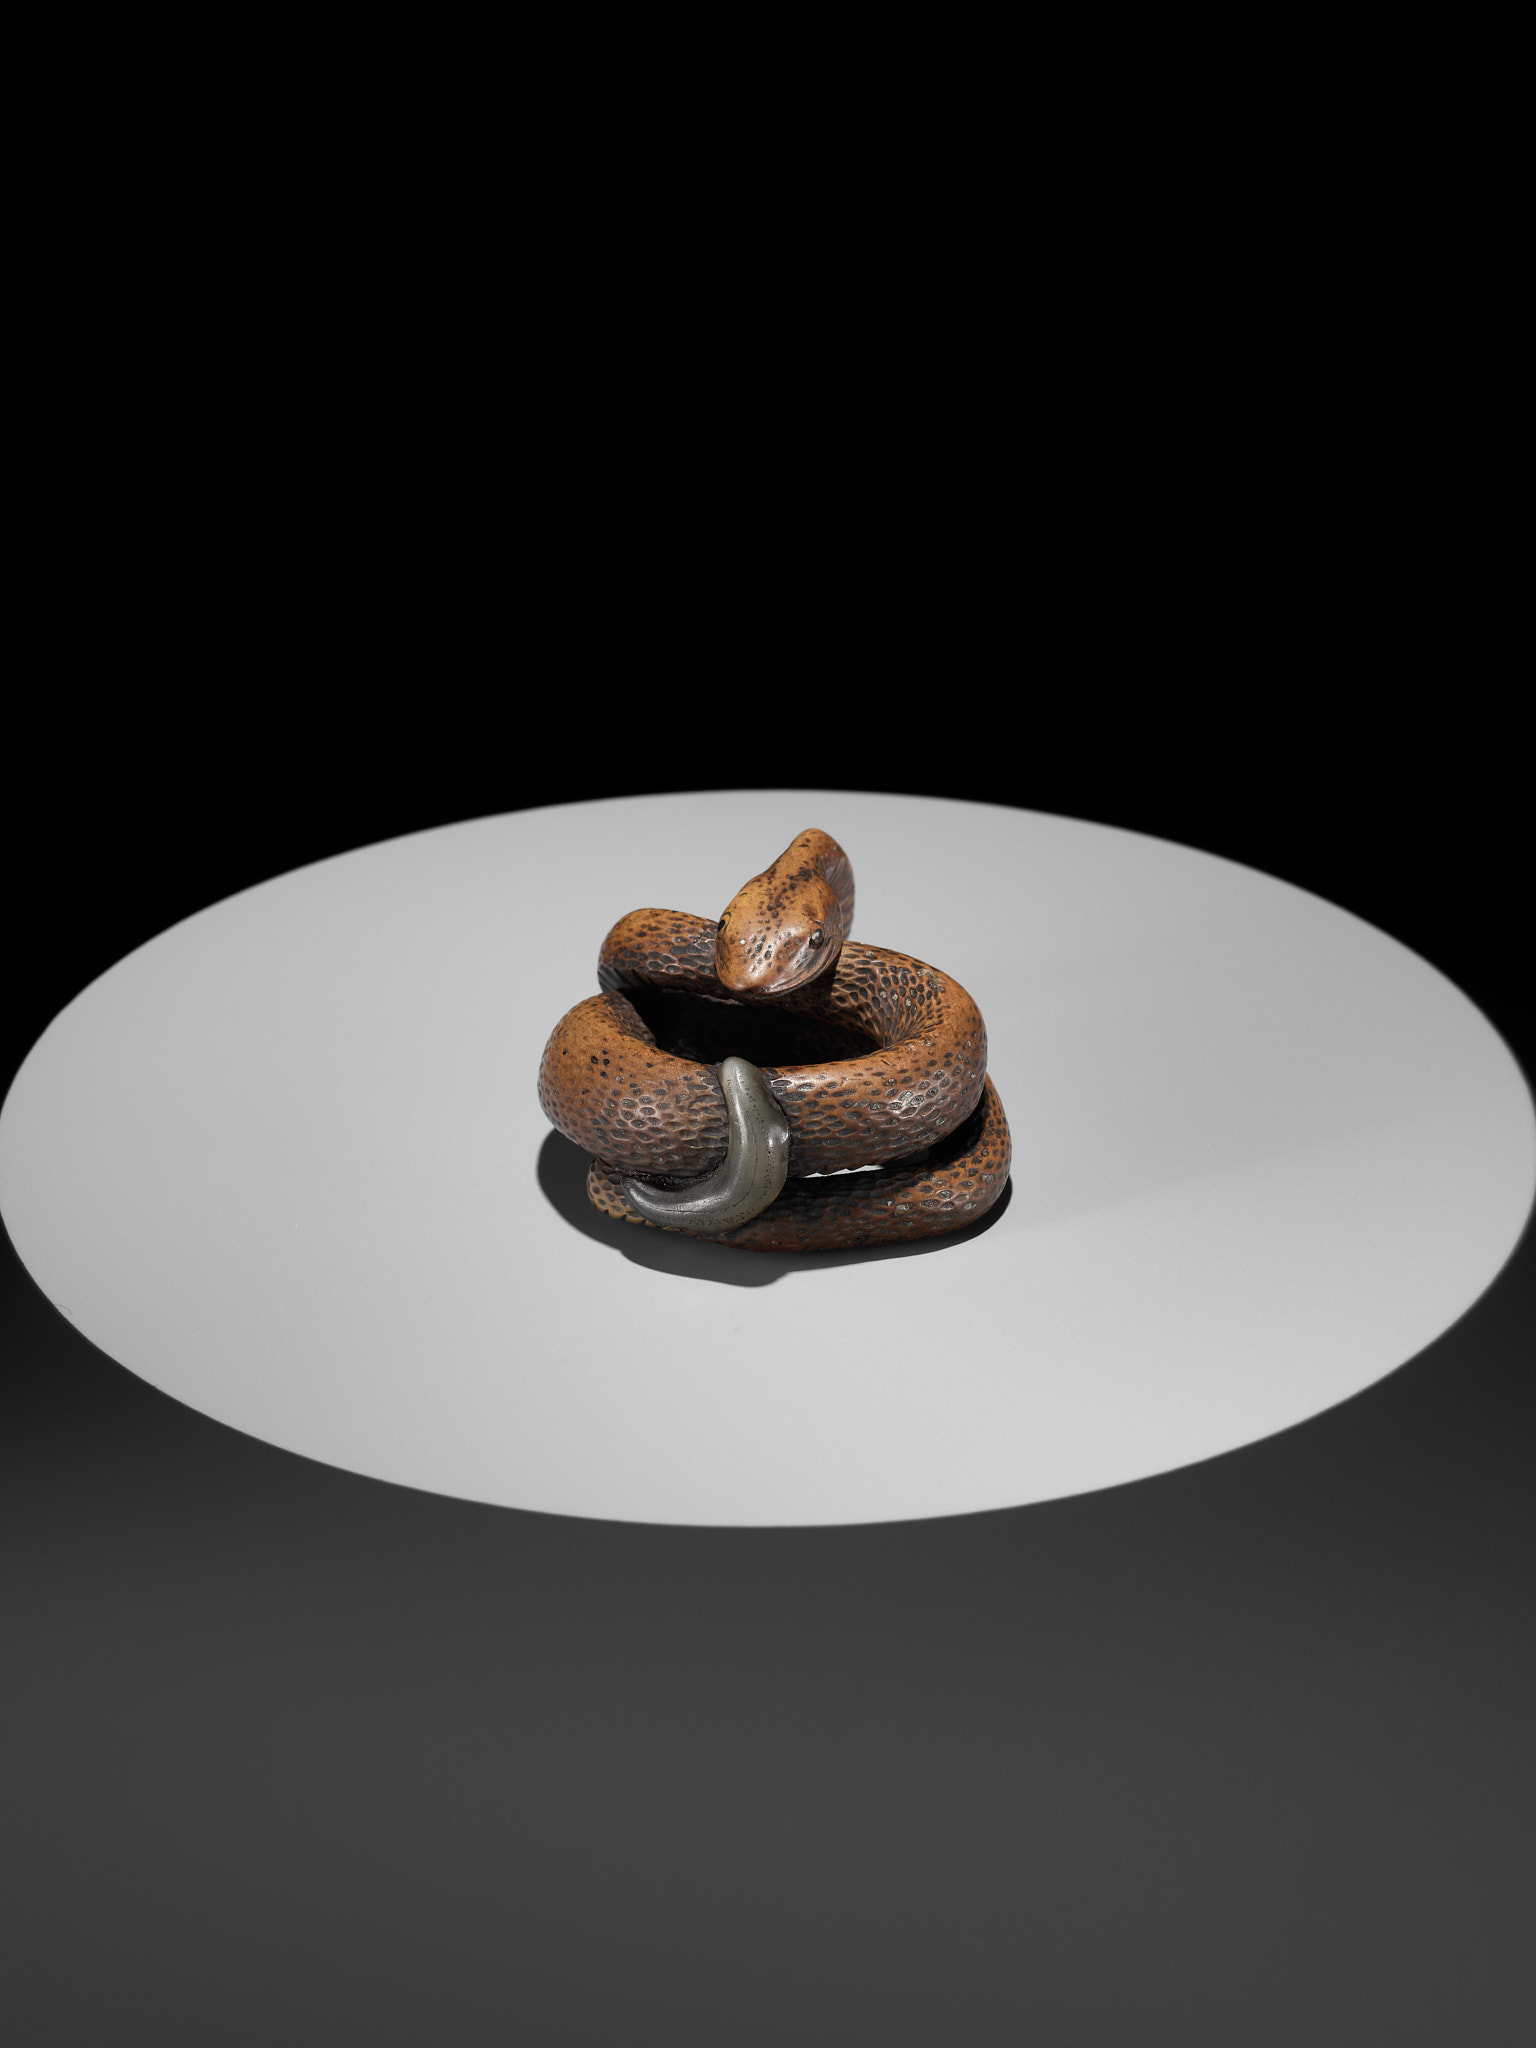 A LARGE AND POWERFUL WOOD NETSUKE OF A COILED SNAKE WITH AN INLAID SLUG BY TOMOKAZU - Image 10 of 13